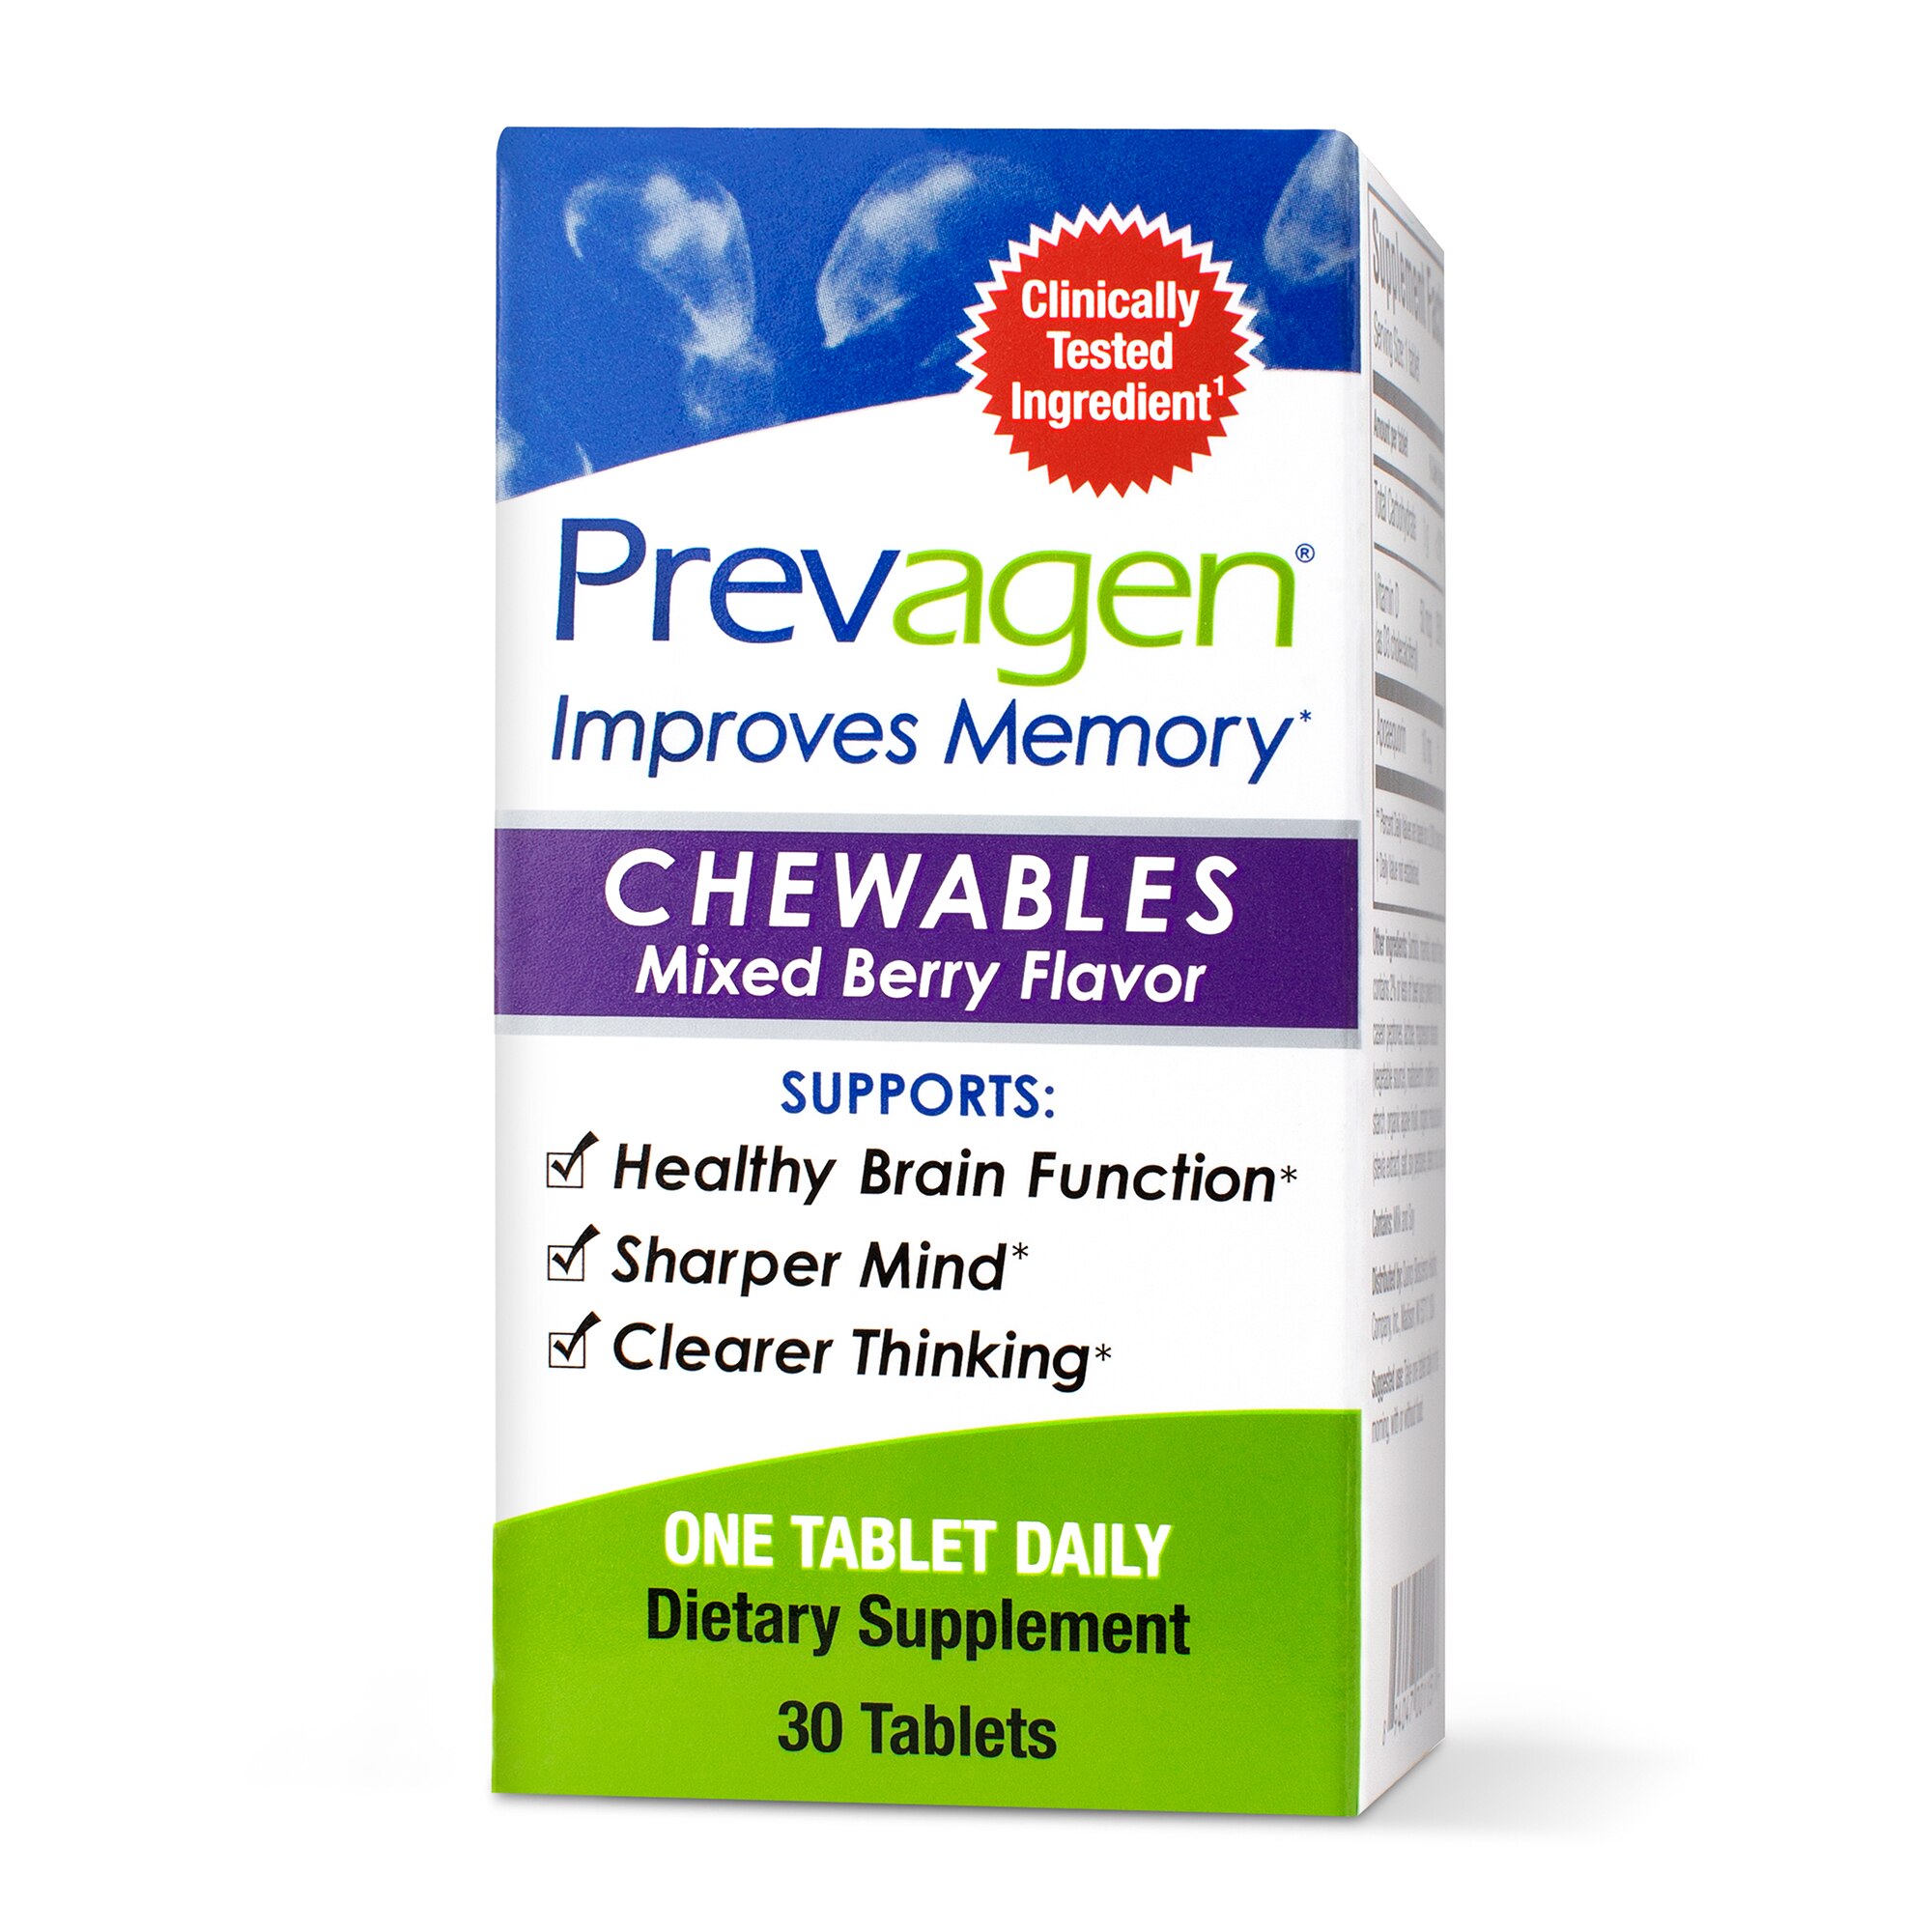 Prevagen Improves Memory Chewables, Mixed Berry Flavor, 30 CT